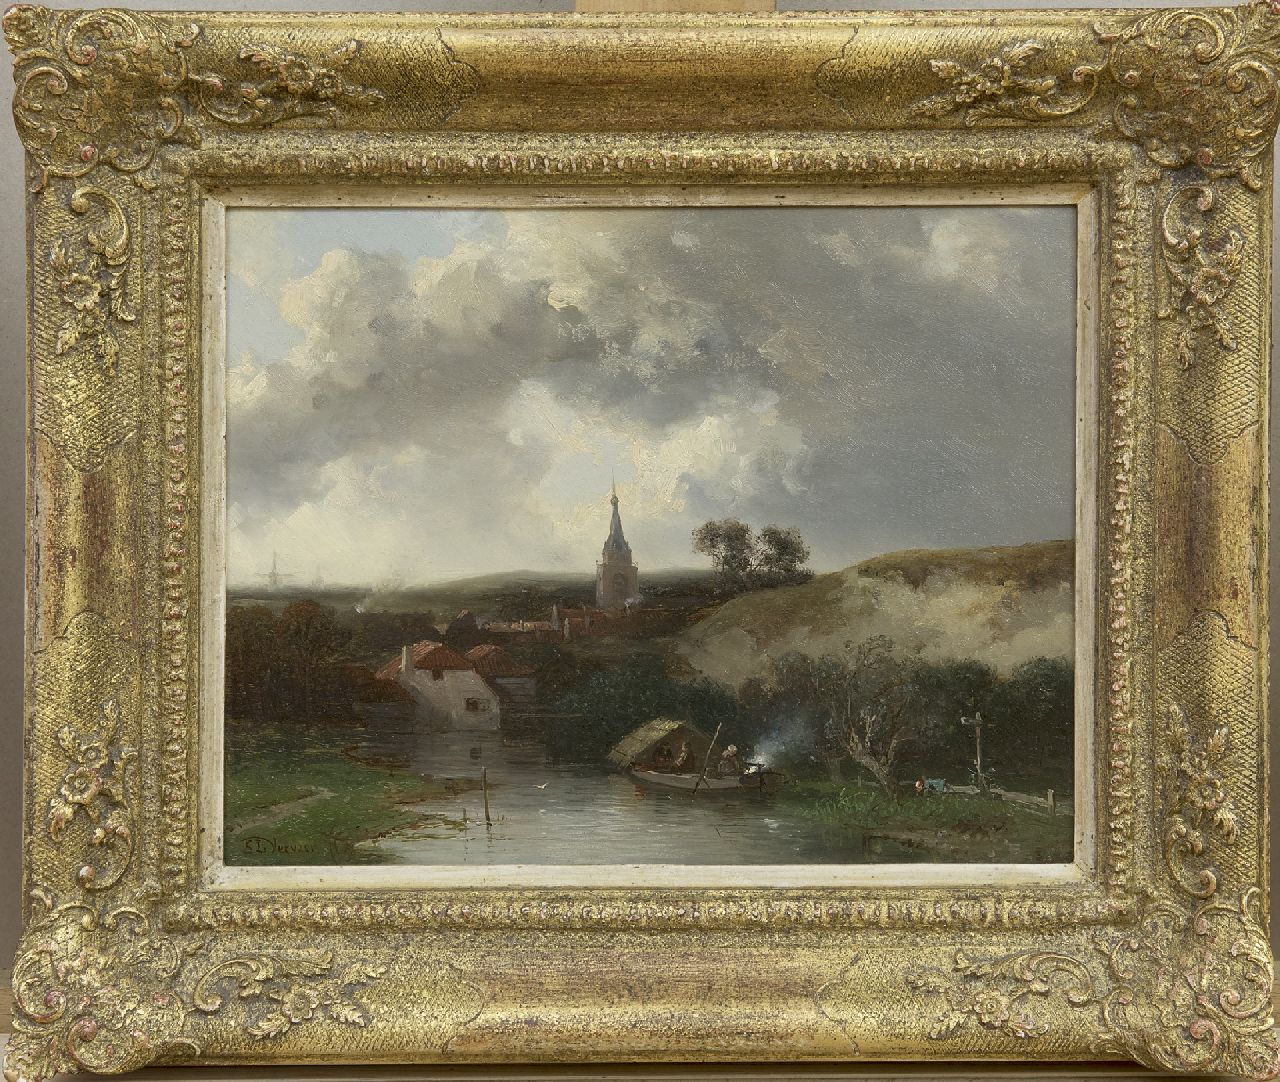 Verveer S.L.  | 'Salomon' Leonardus Verveer | Paintings offered for sale | A village in the dunes, oil on panel 19.7 x 25.3 cm, signed l.l. and painted ca. 1857-1860